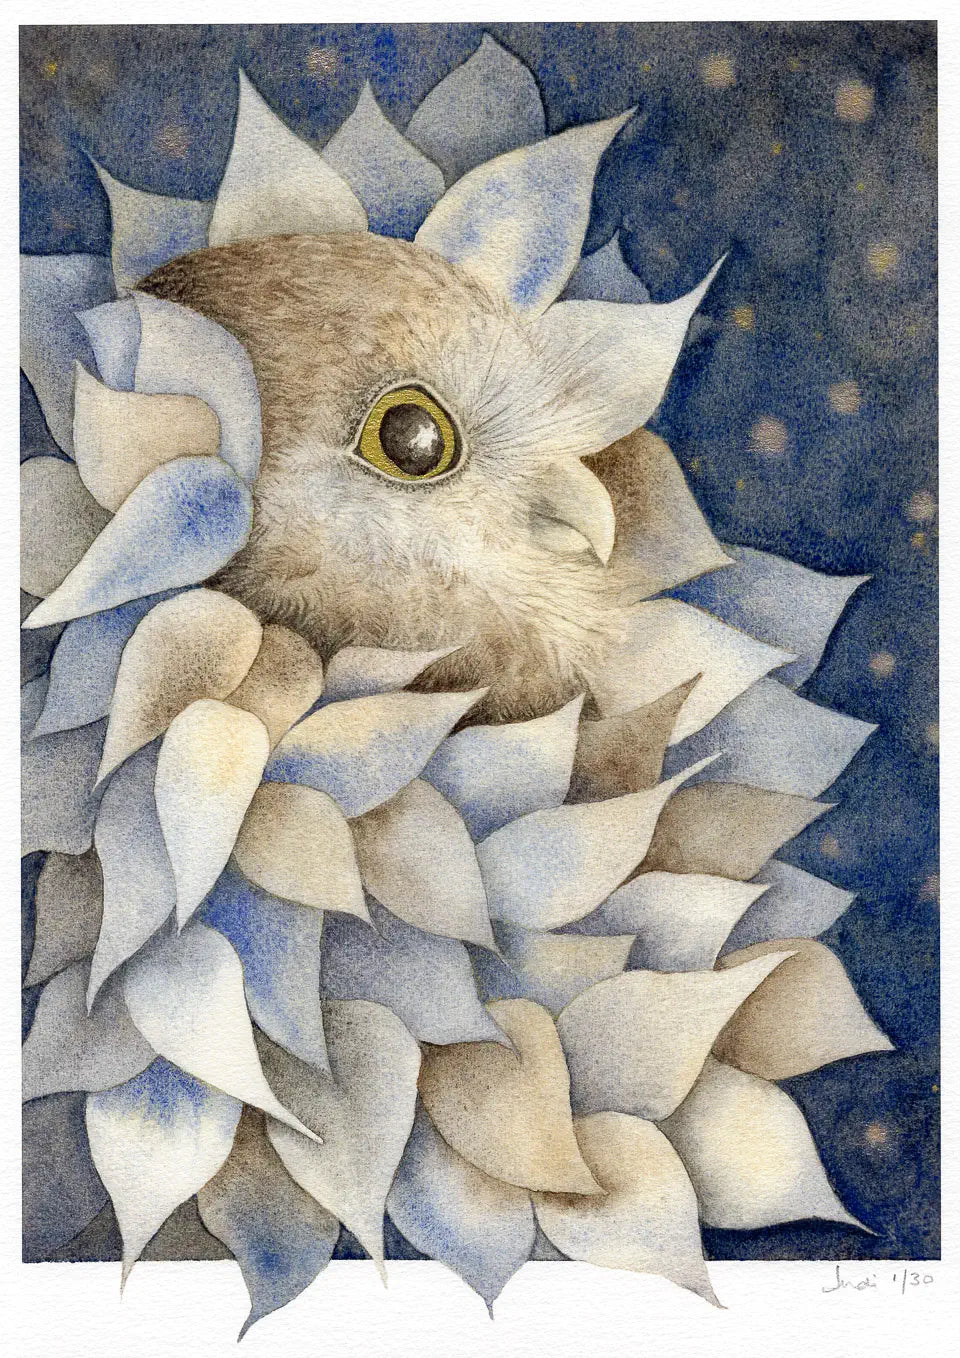 Scan of embellished print showing an owl with golden eyes peeking out of a bouquet of leaves